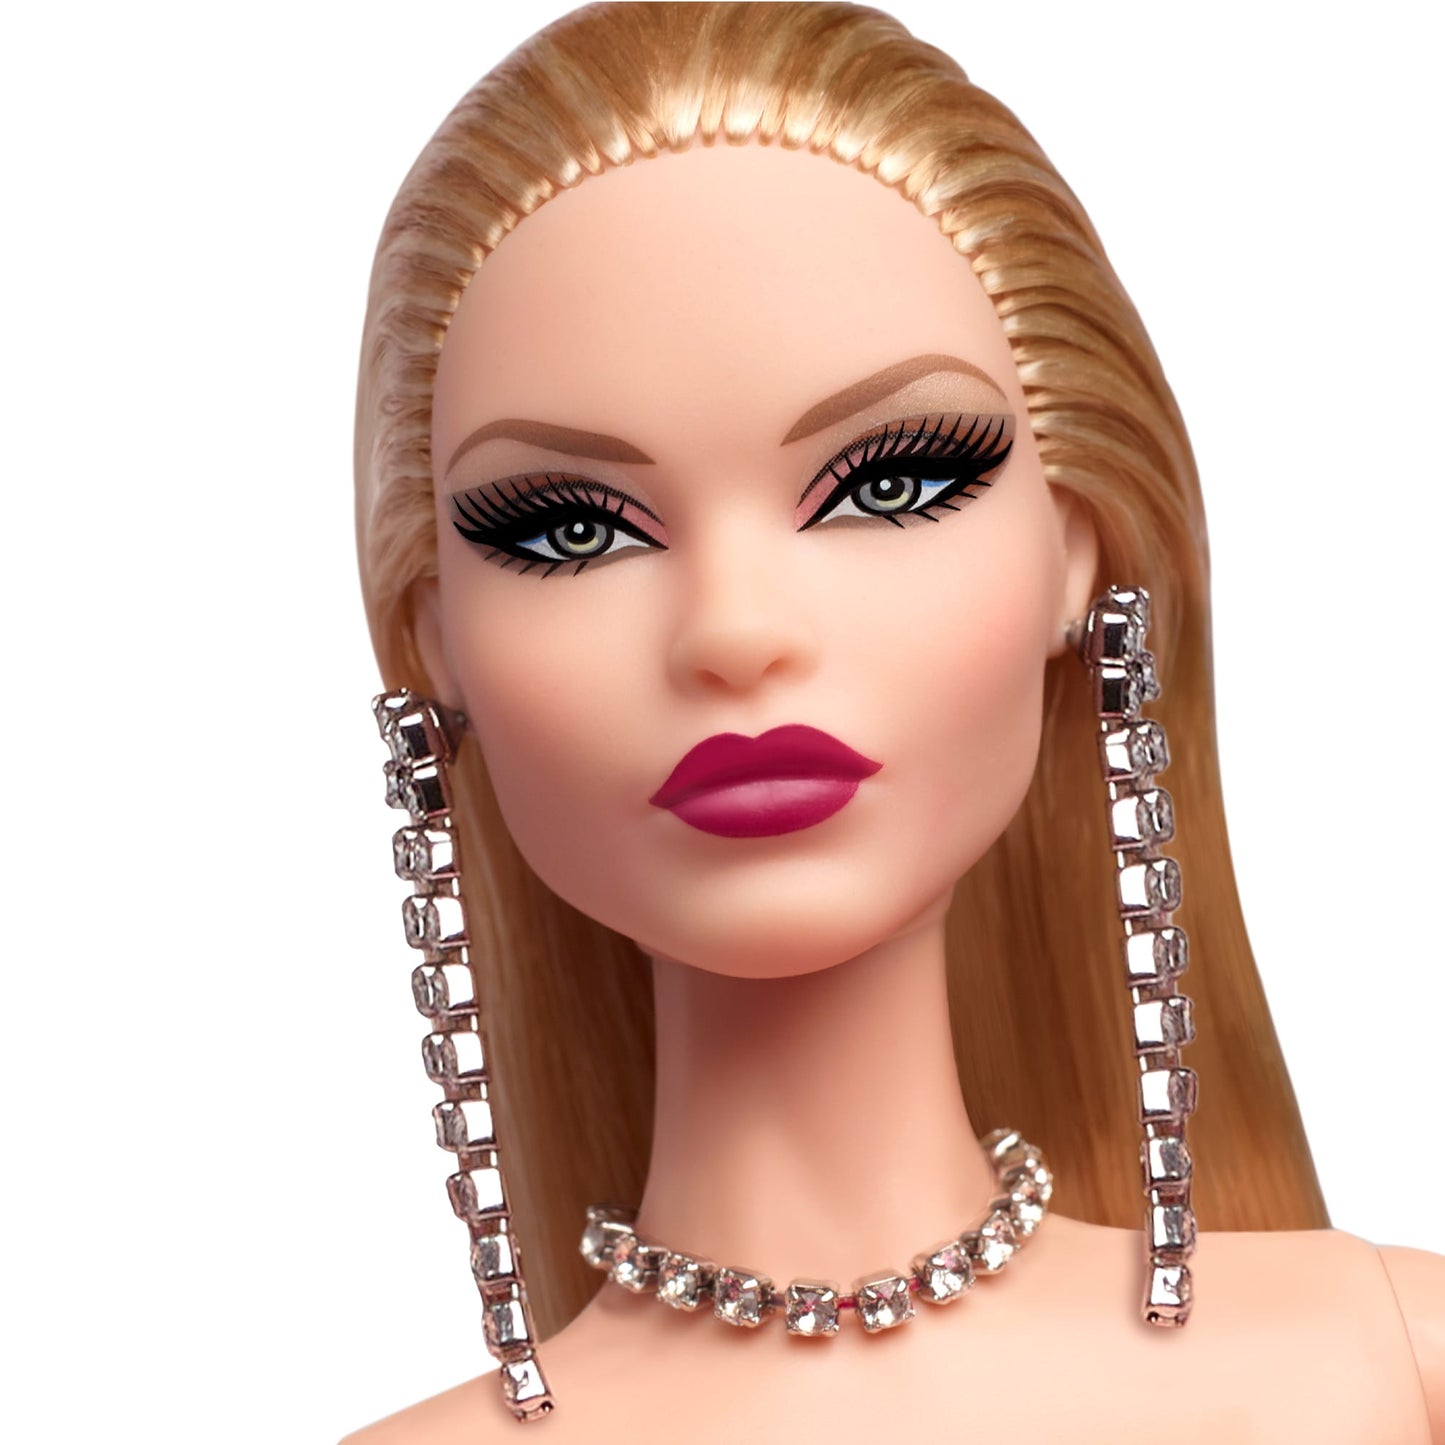 Barbie Styled By Design Suim Noh Doll